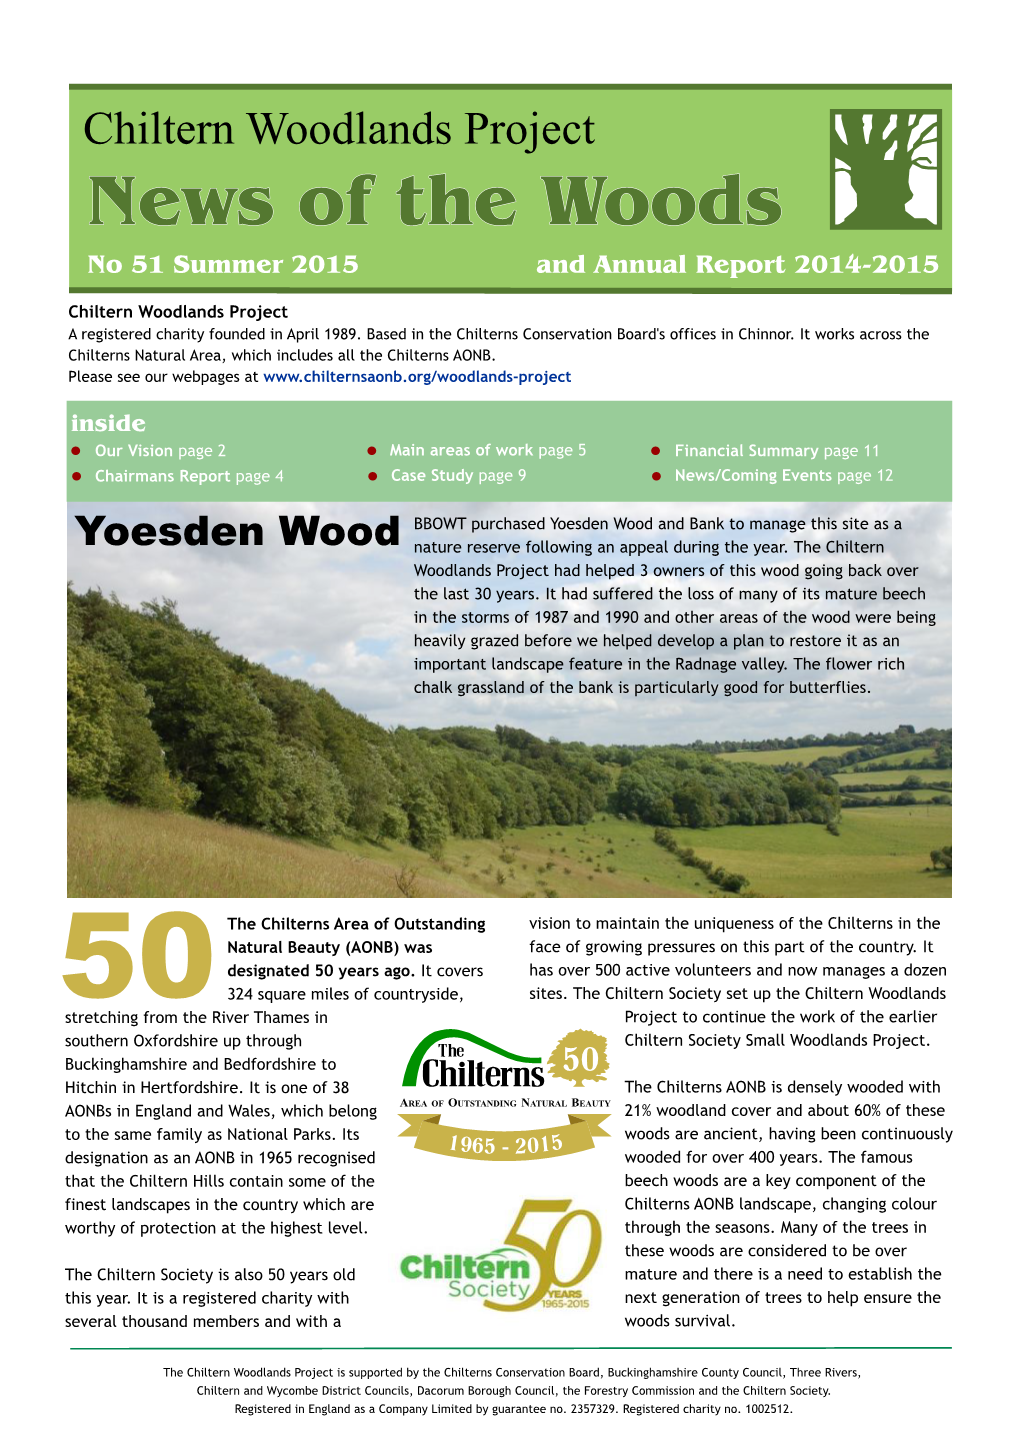 Chiltern Woodlands Project News of the Woods No 51 Summer 2015 and Annual Report 2014-2015